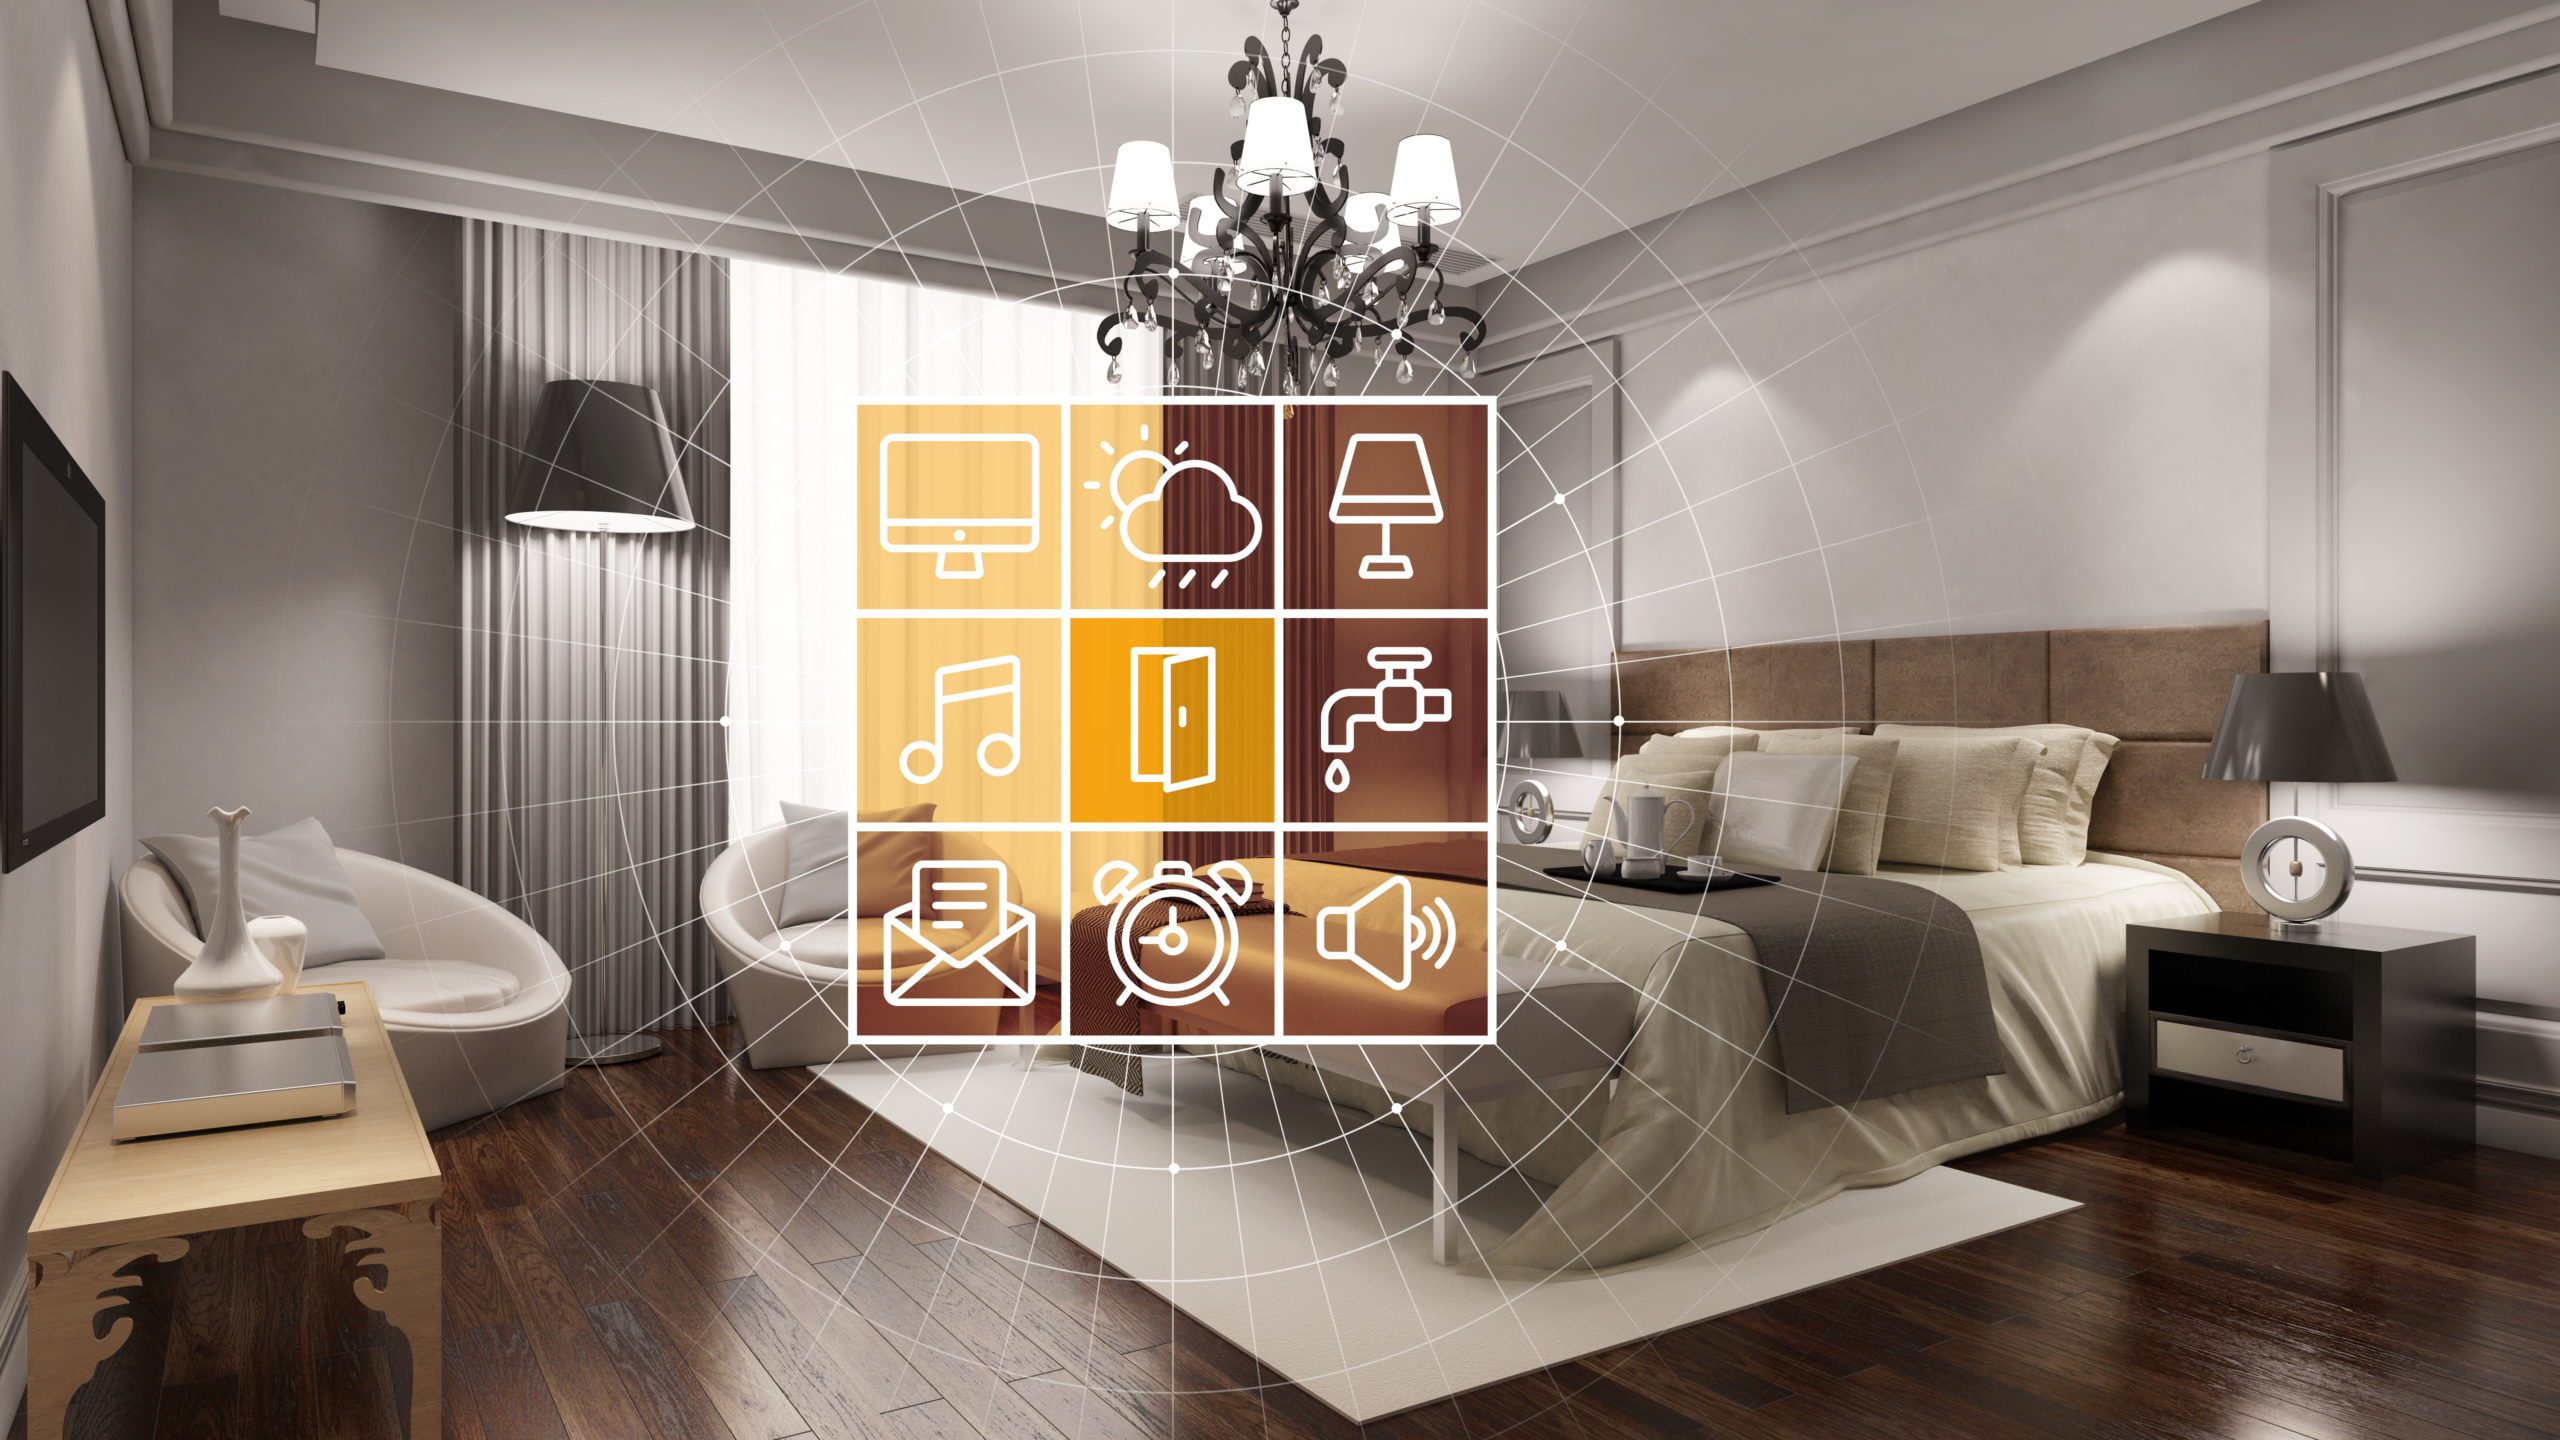 Elegant hotel room with smart home technology interface for control and personalization (3D Rendering)